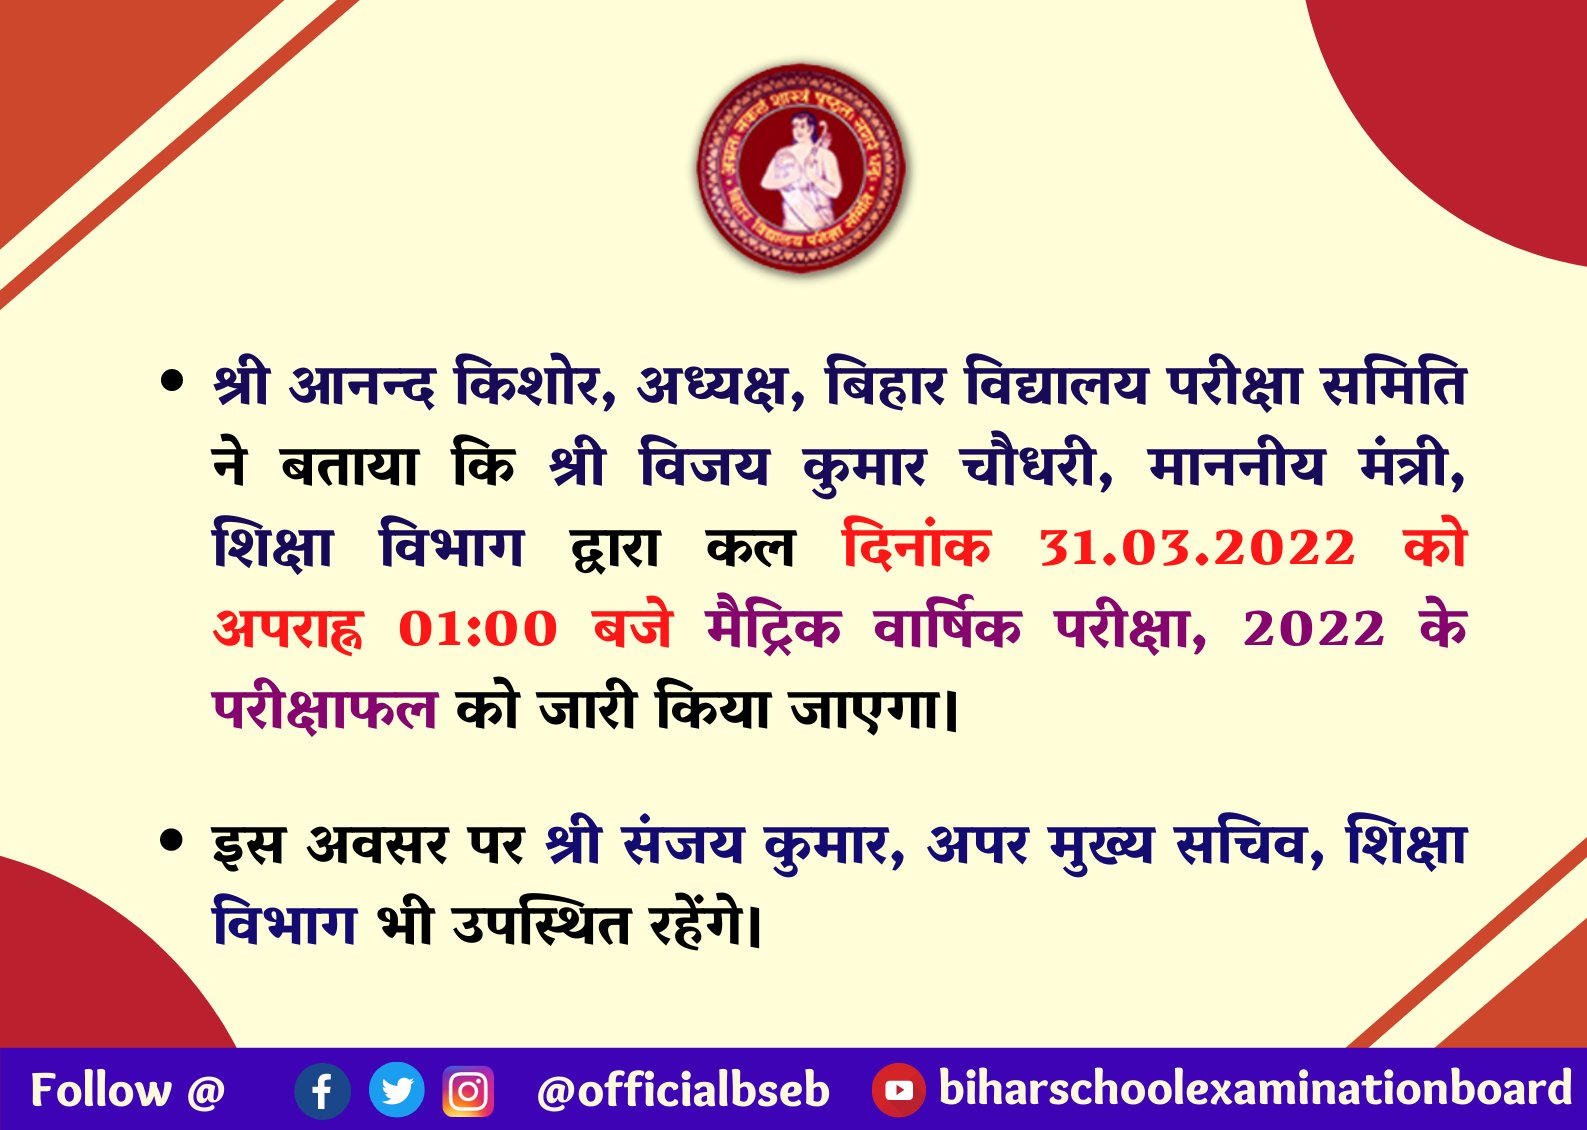 Bihar Board 10th Matric Result 2022 | Direct Link to Check BSEB Results